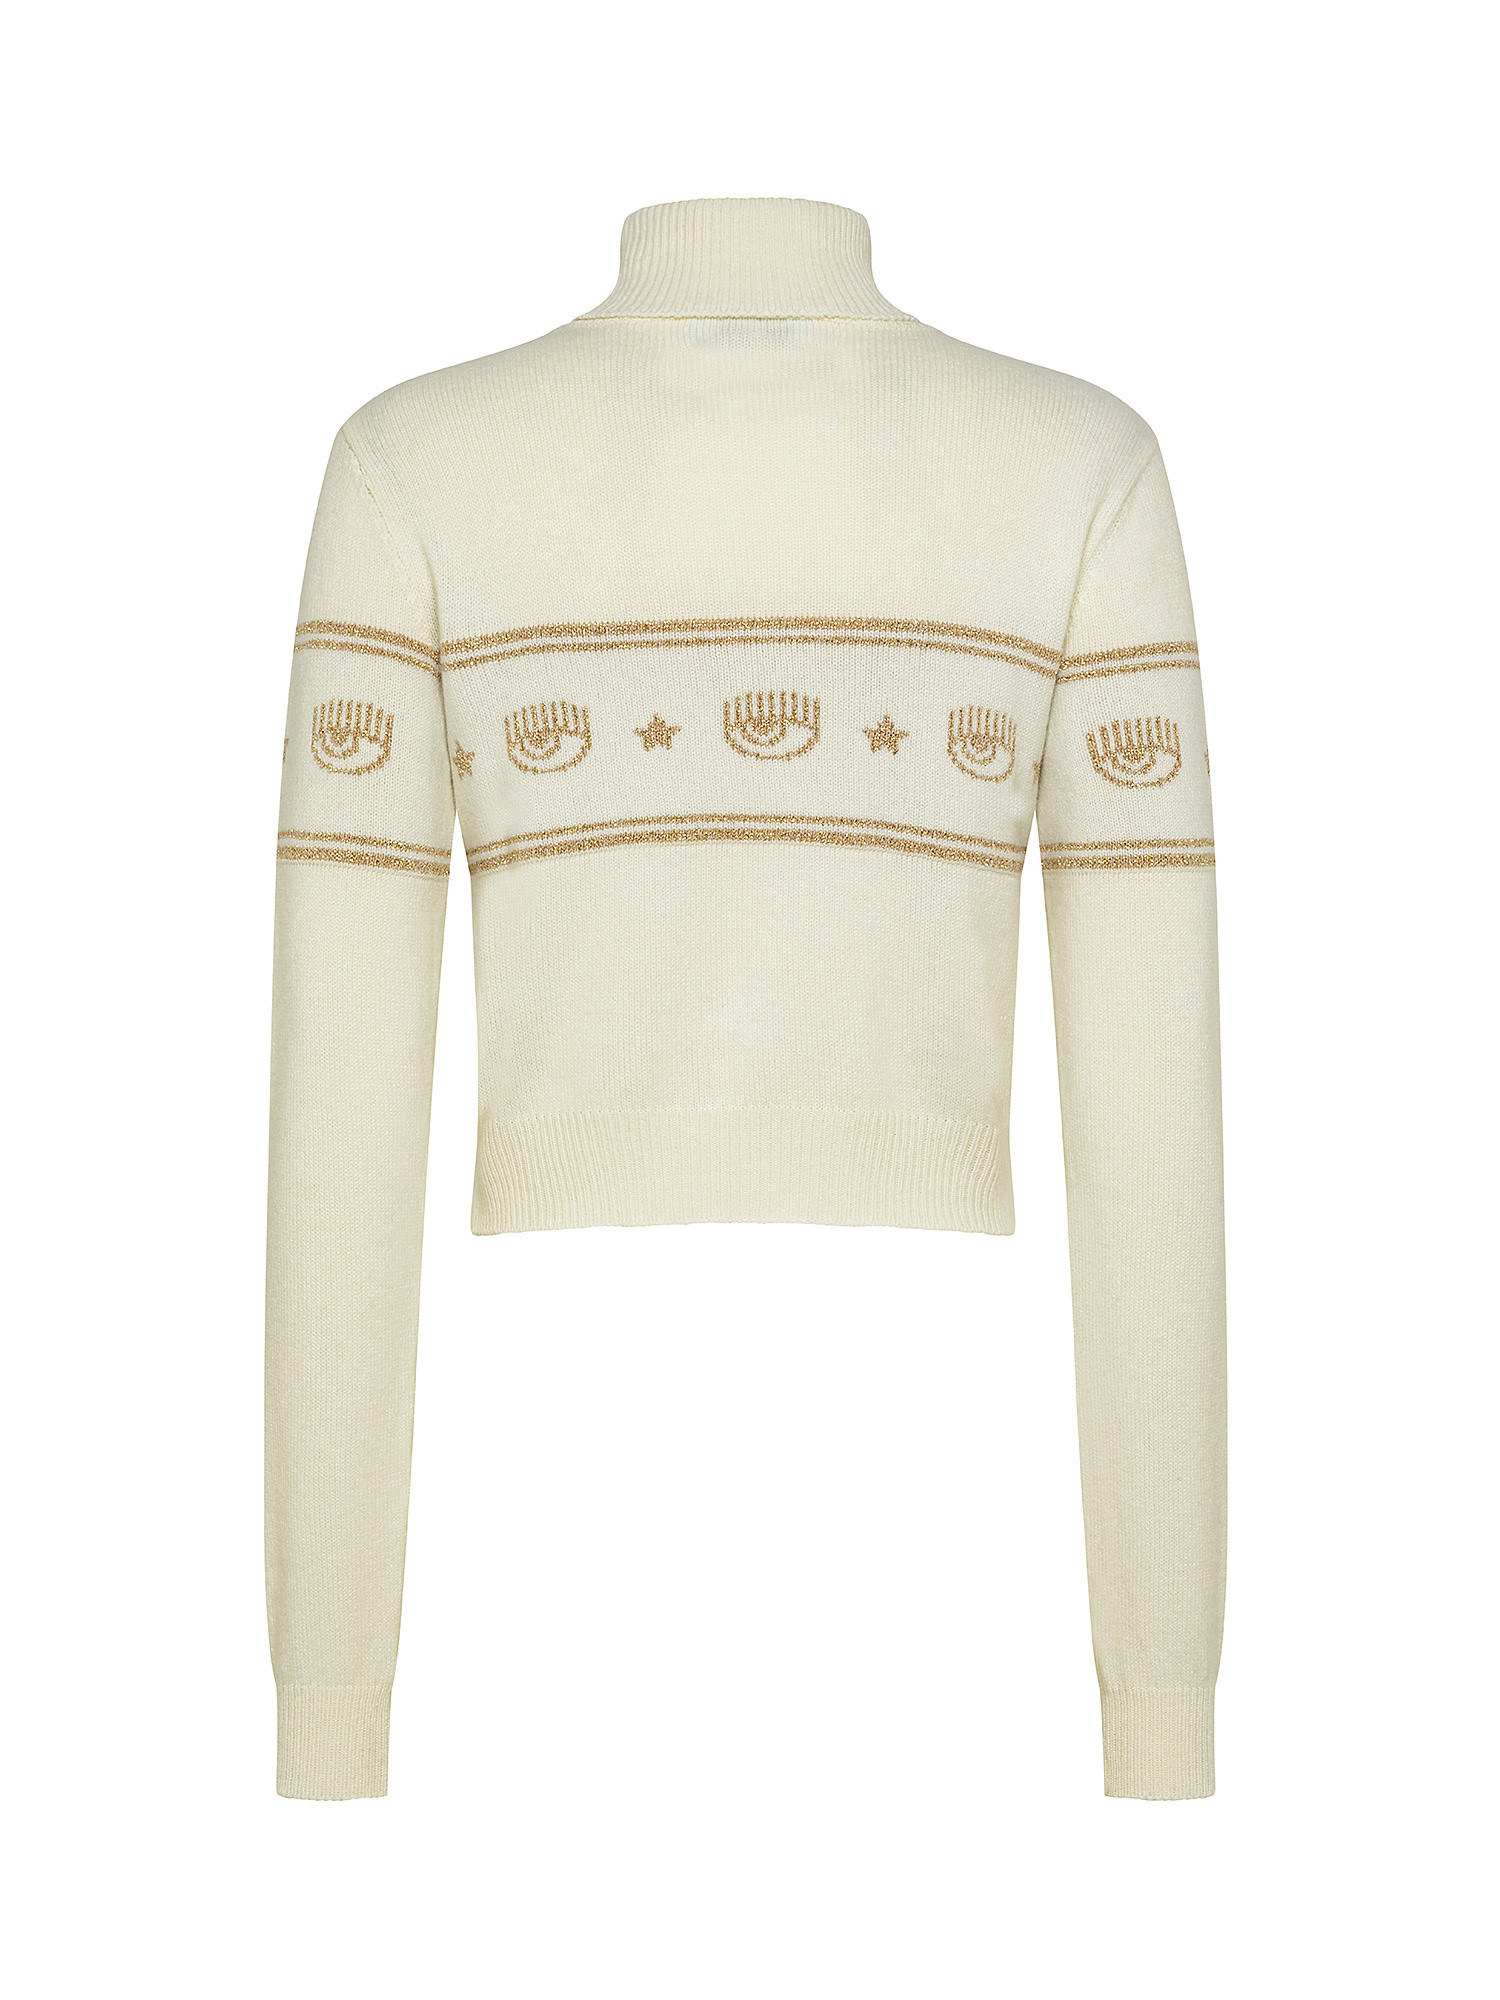 Sweater with logo, White, large image number 1